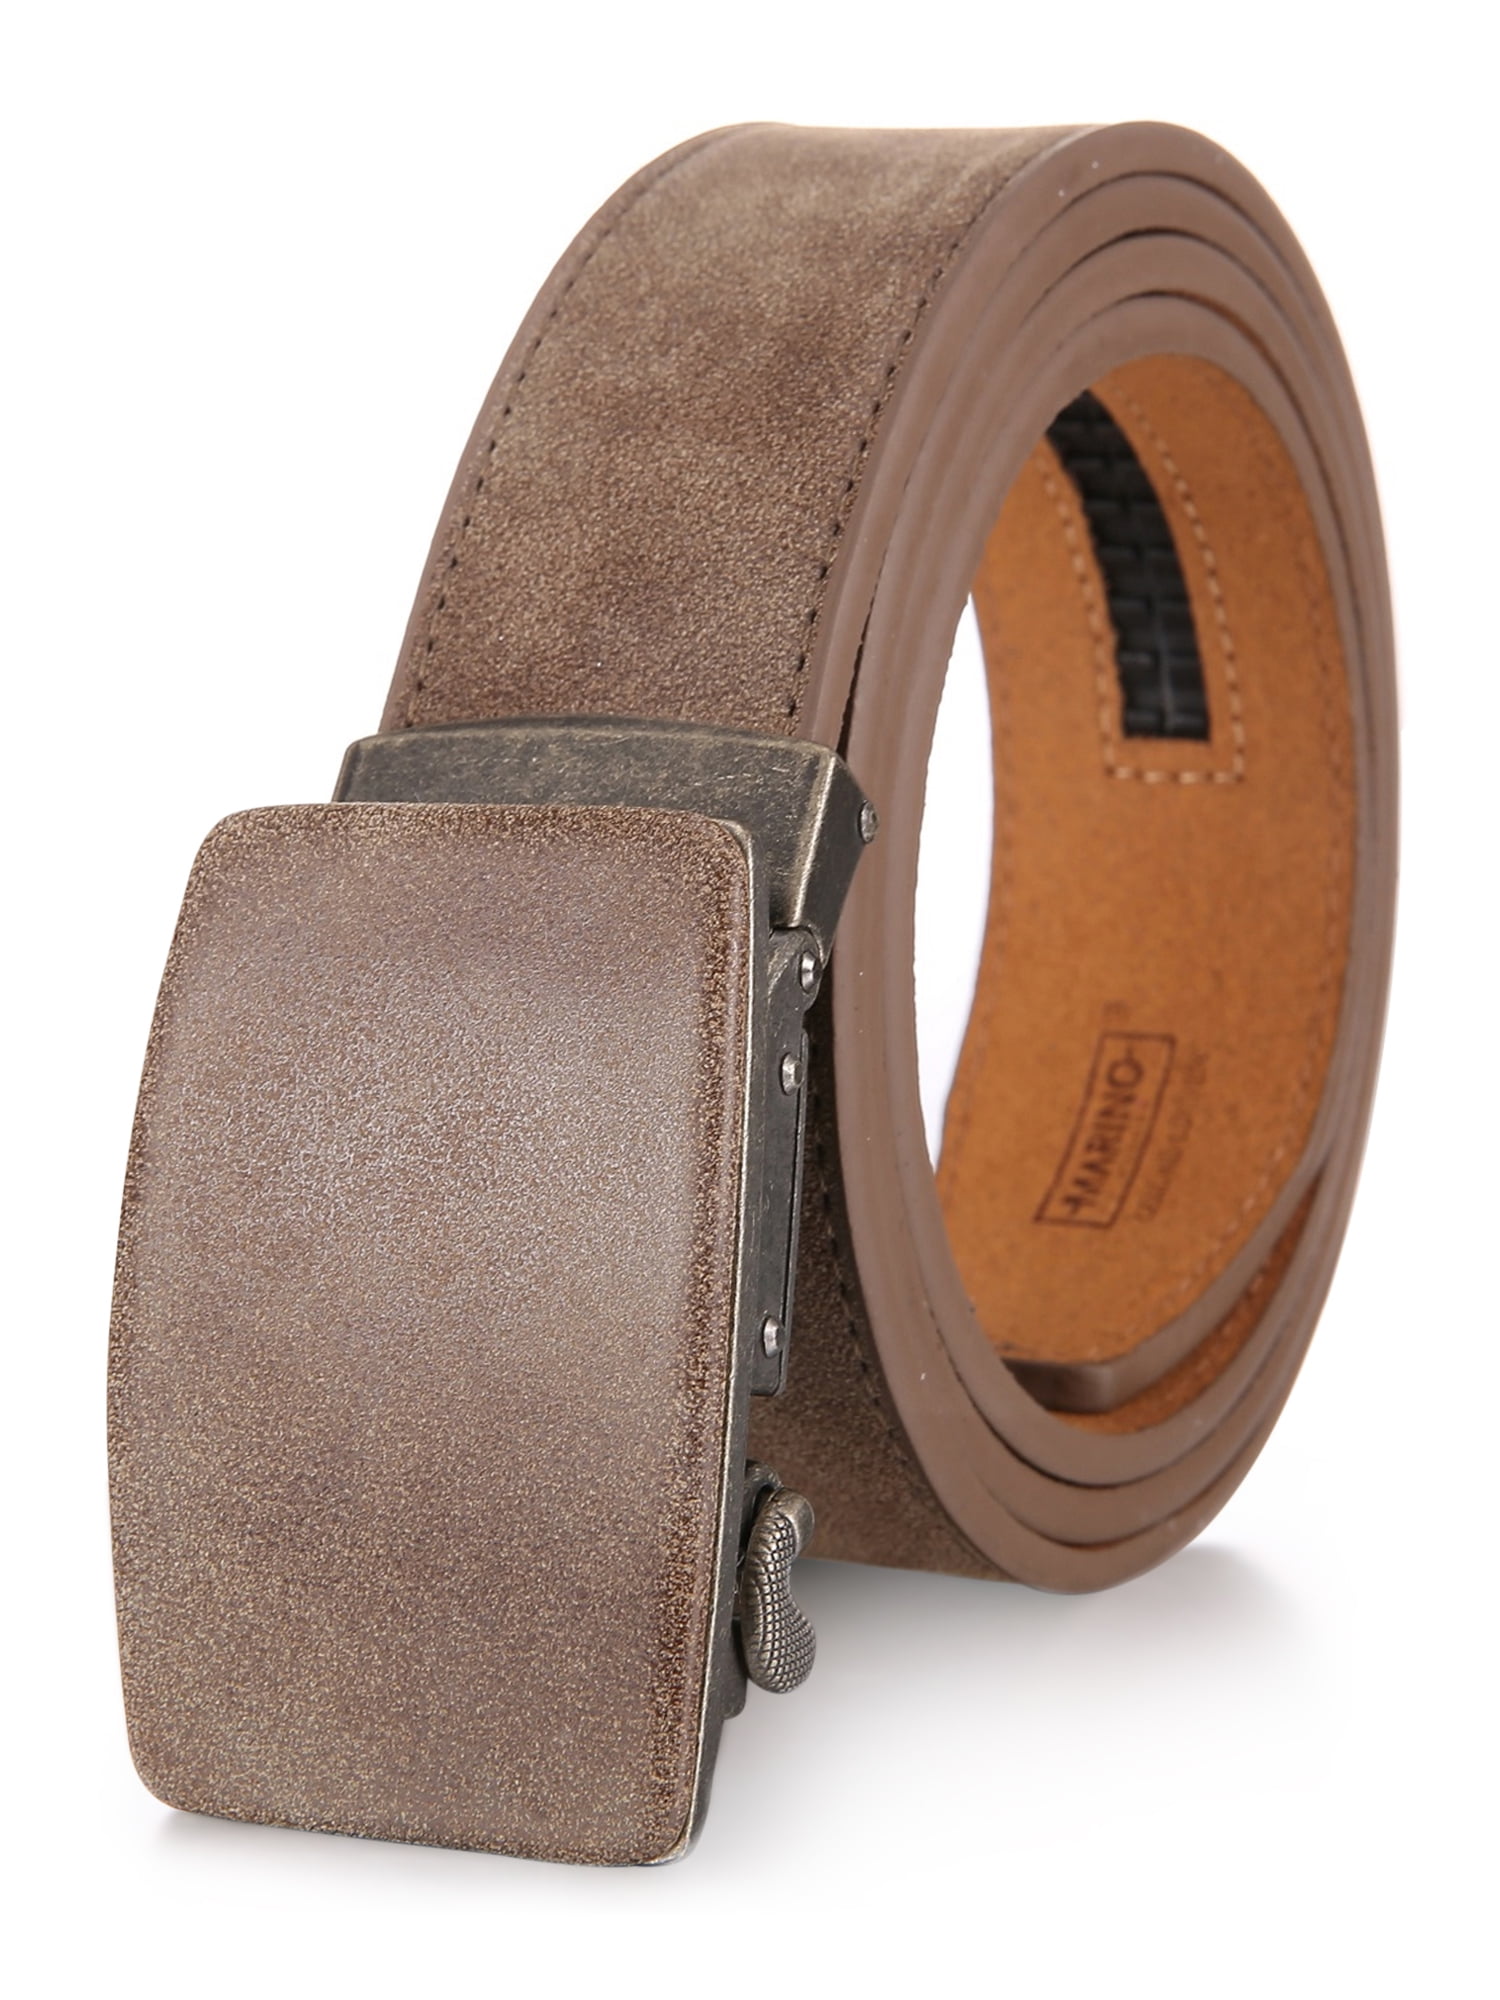 McGuire Nicholas 960 2-Inch Roller Buckle Belt in Tan Saddle Leather